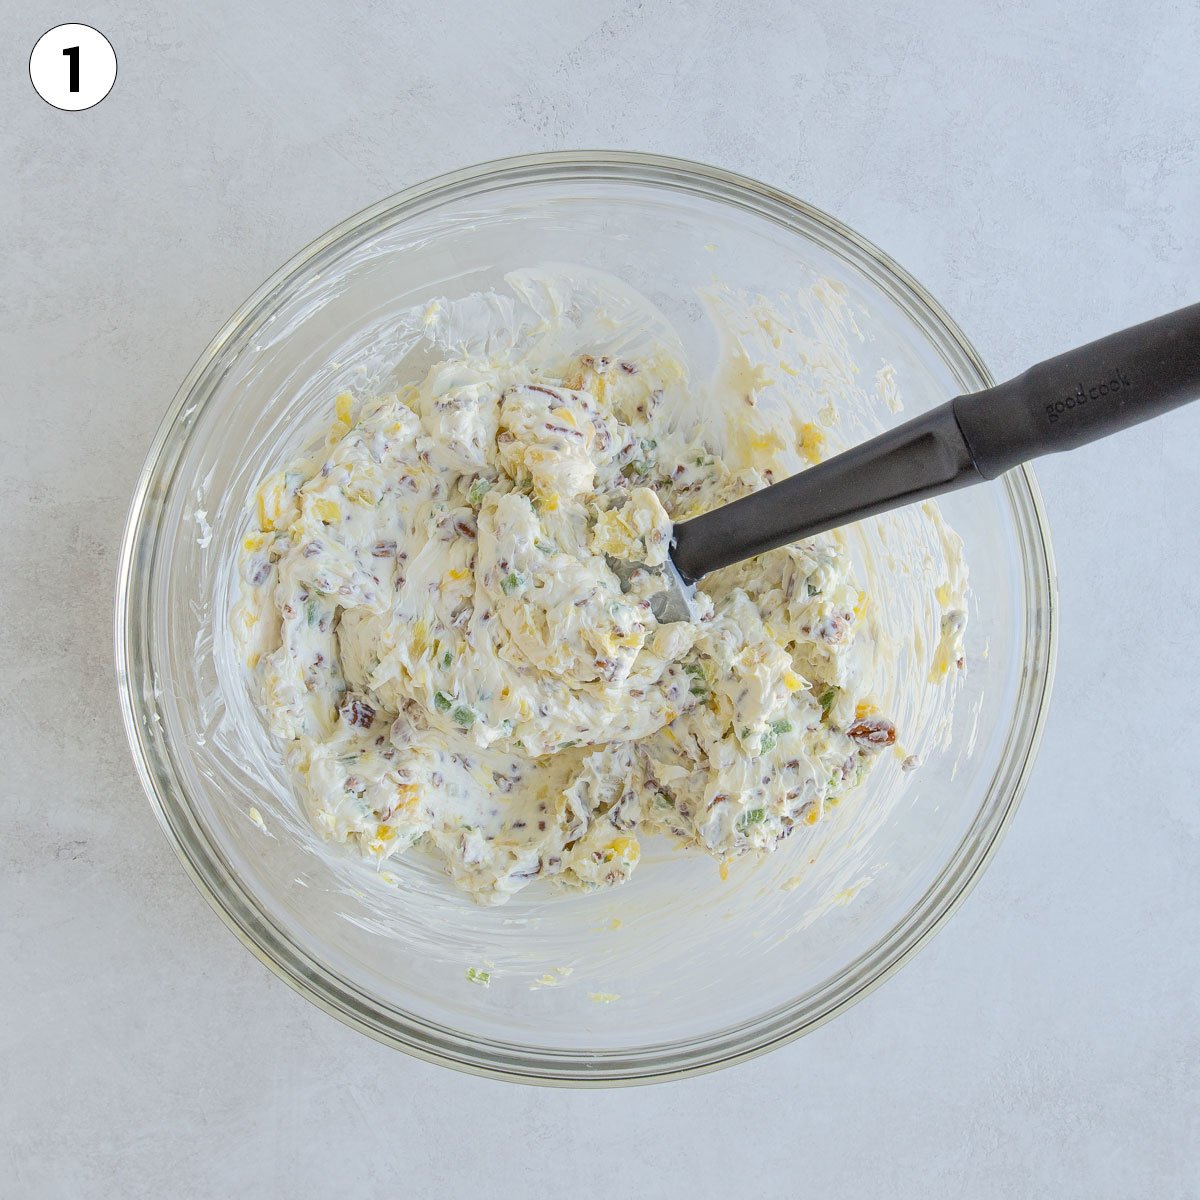 Overhead view of pineapple cream cheese ball mixture in a bowl with a silicone spatula.